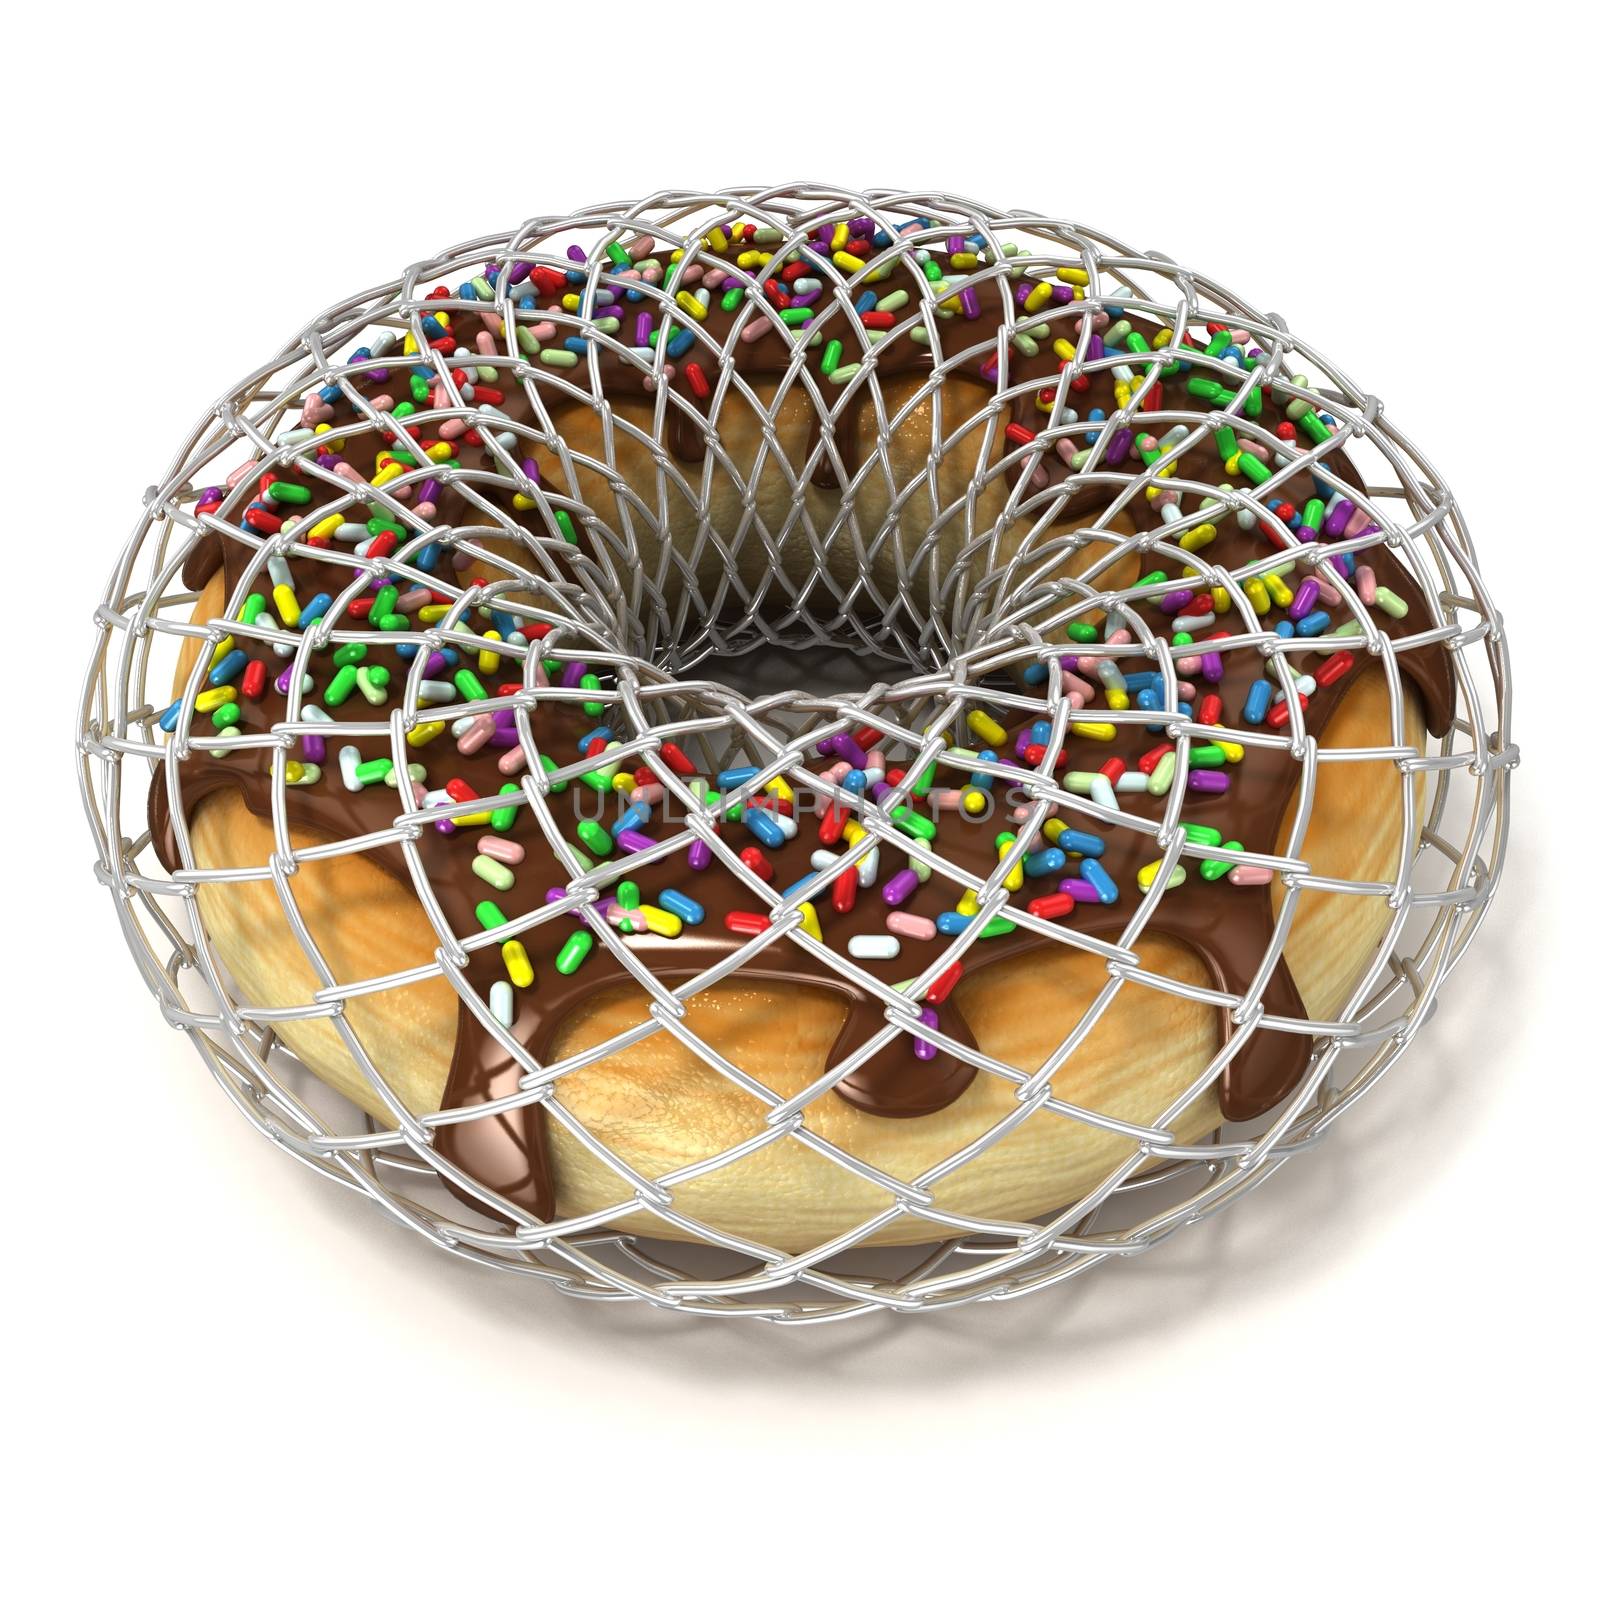 Chocolate donut with sprinkles in wire fence, as symbol of diet. Isolated on a white background